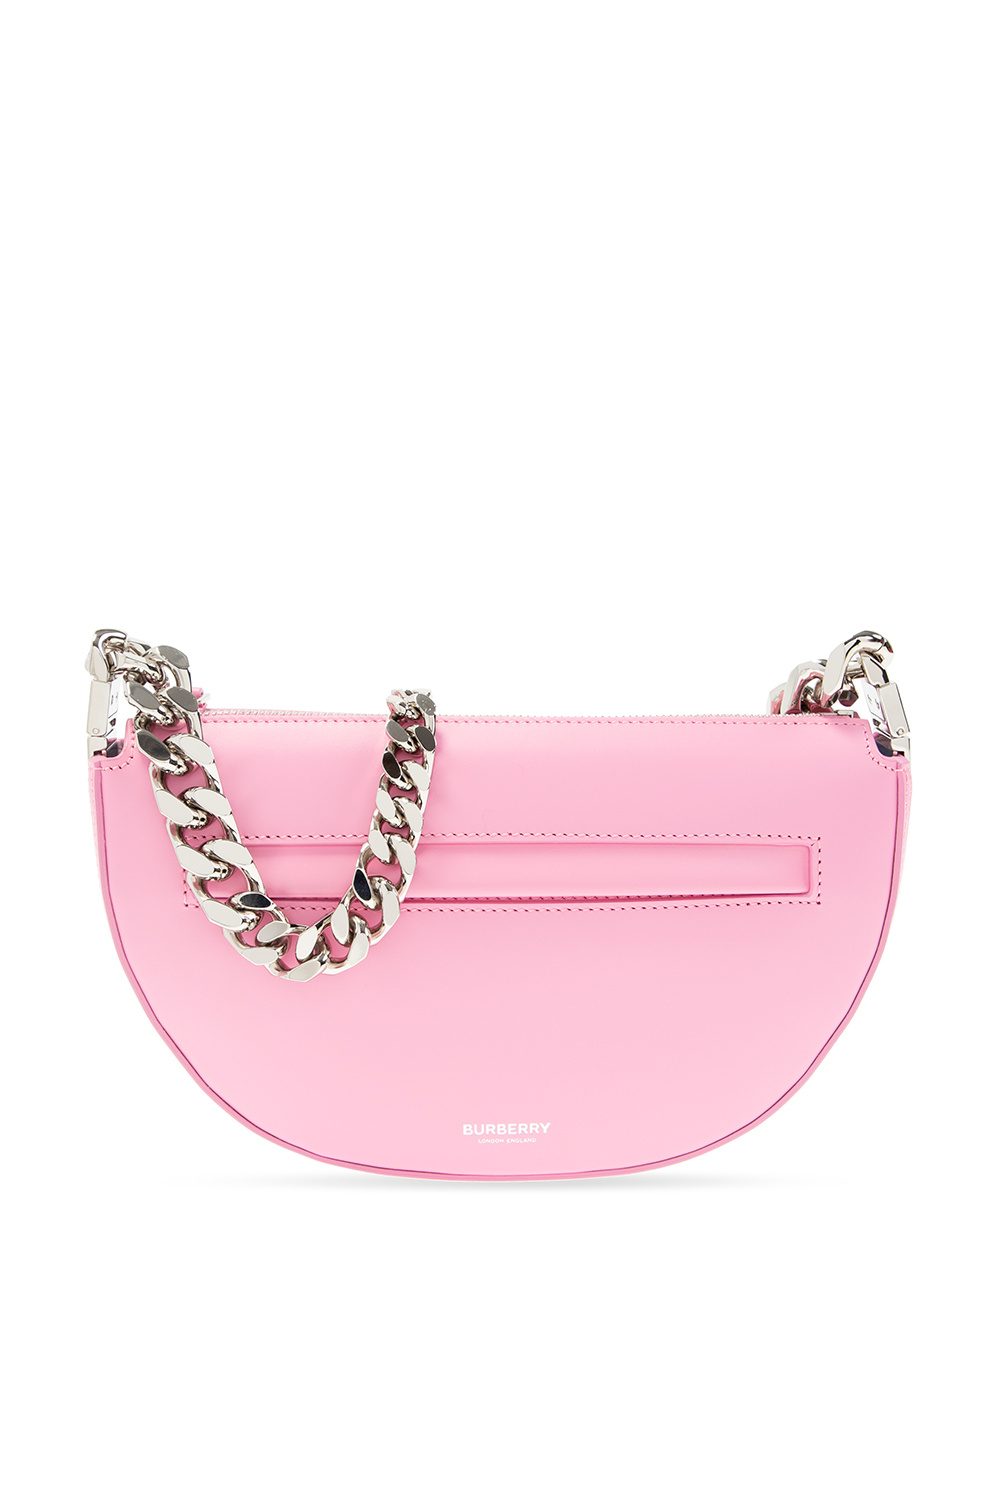 burberry #pink #shoulderbag #fashion in 2023